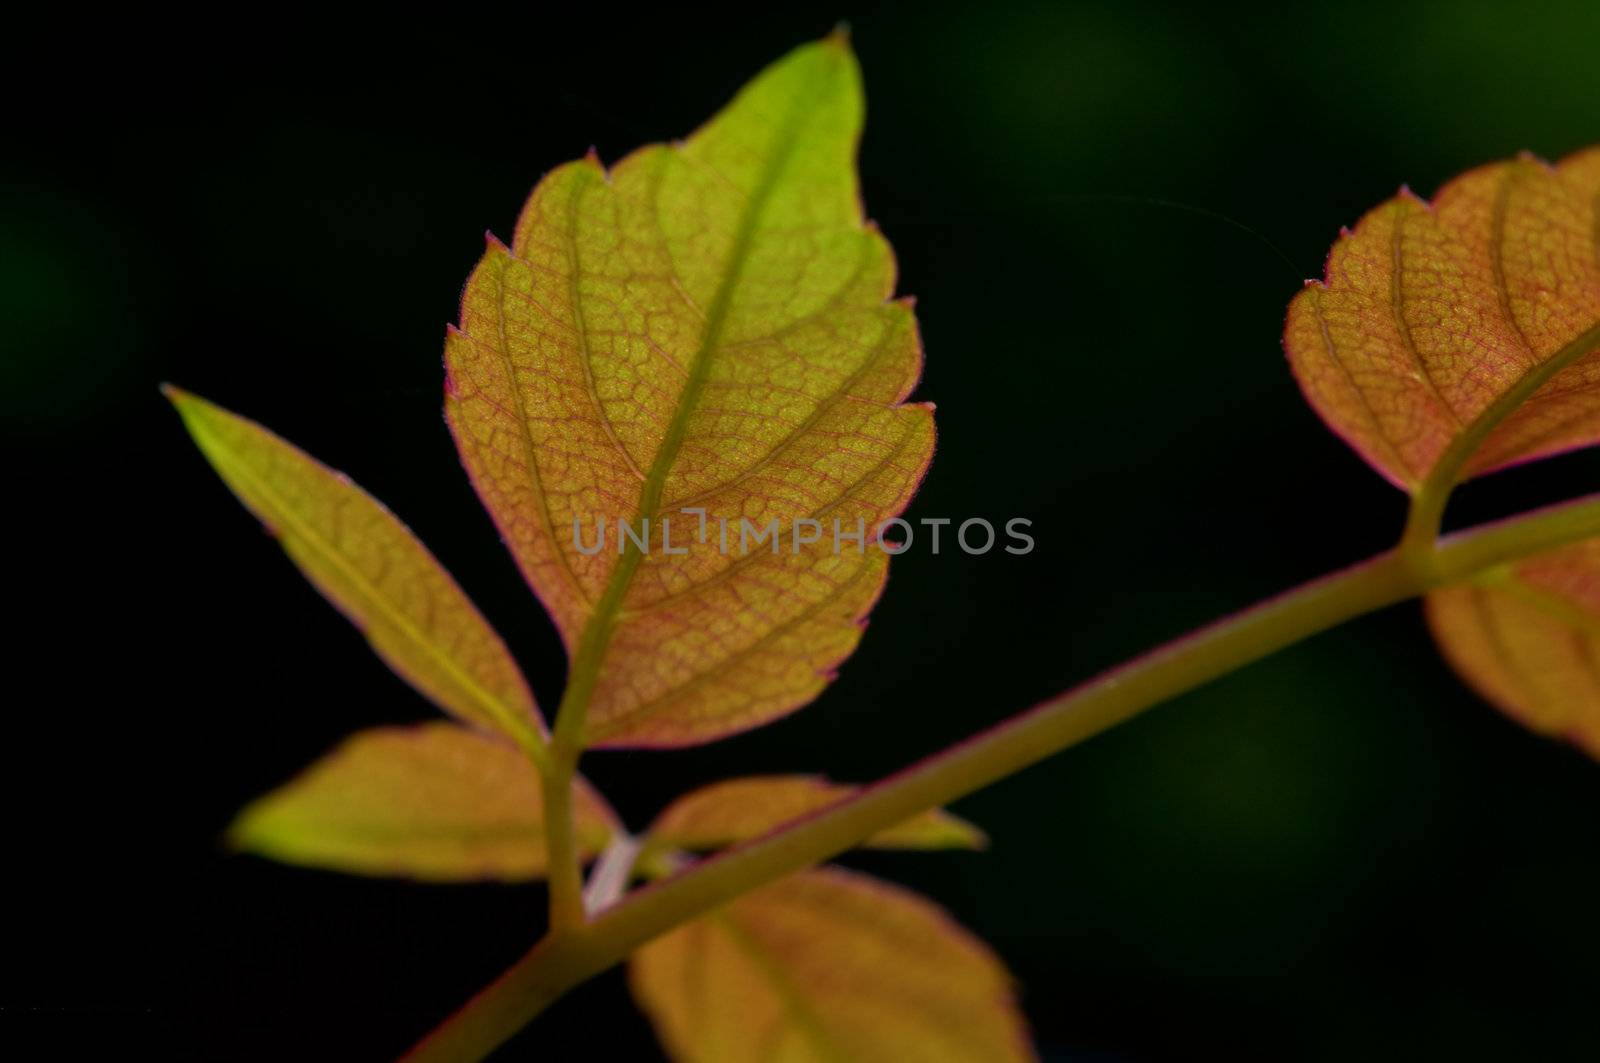 The leafs of climbing plant on black background